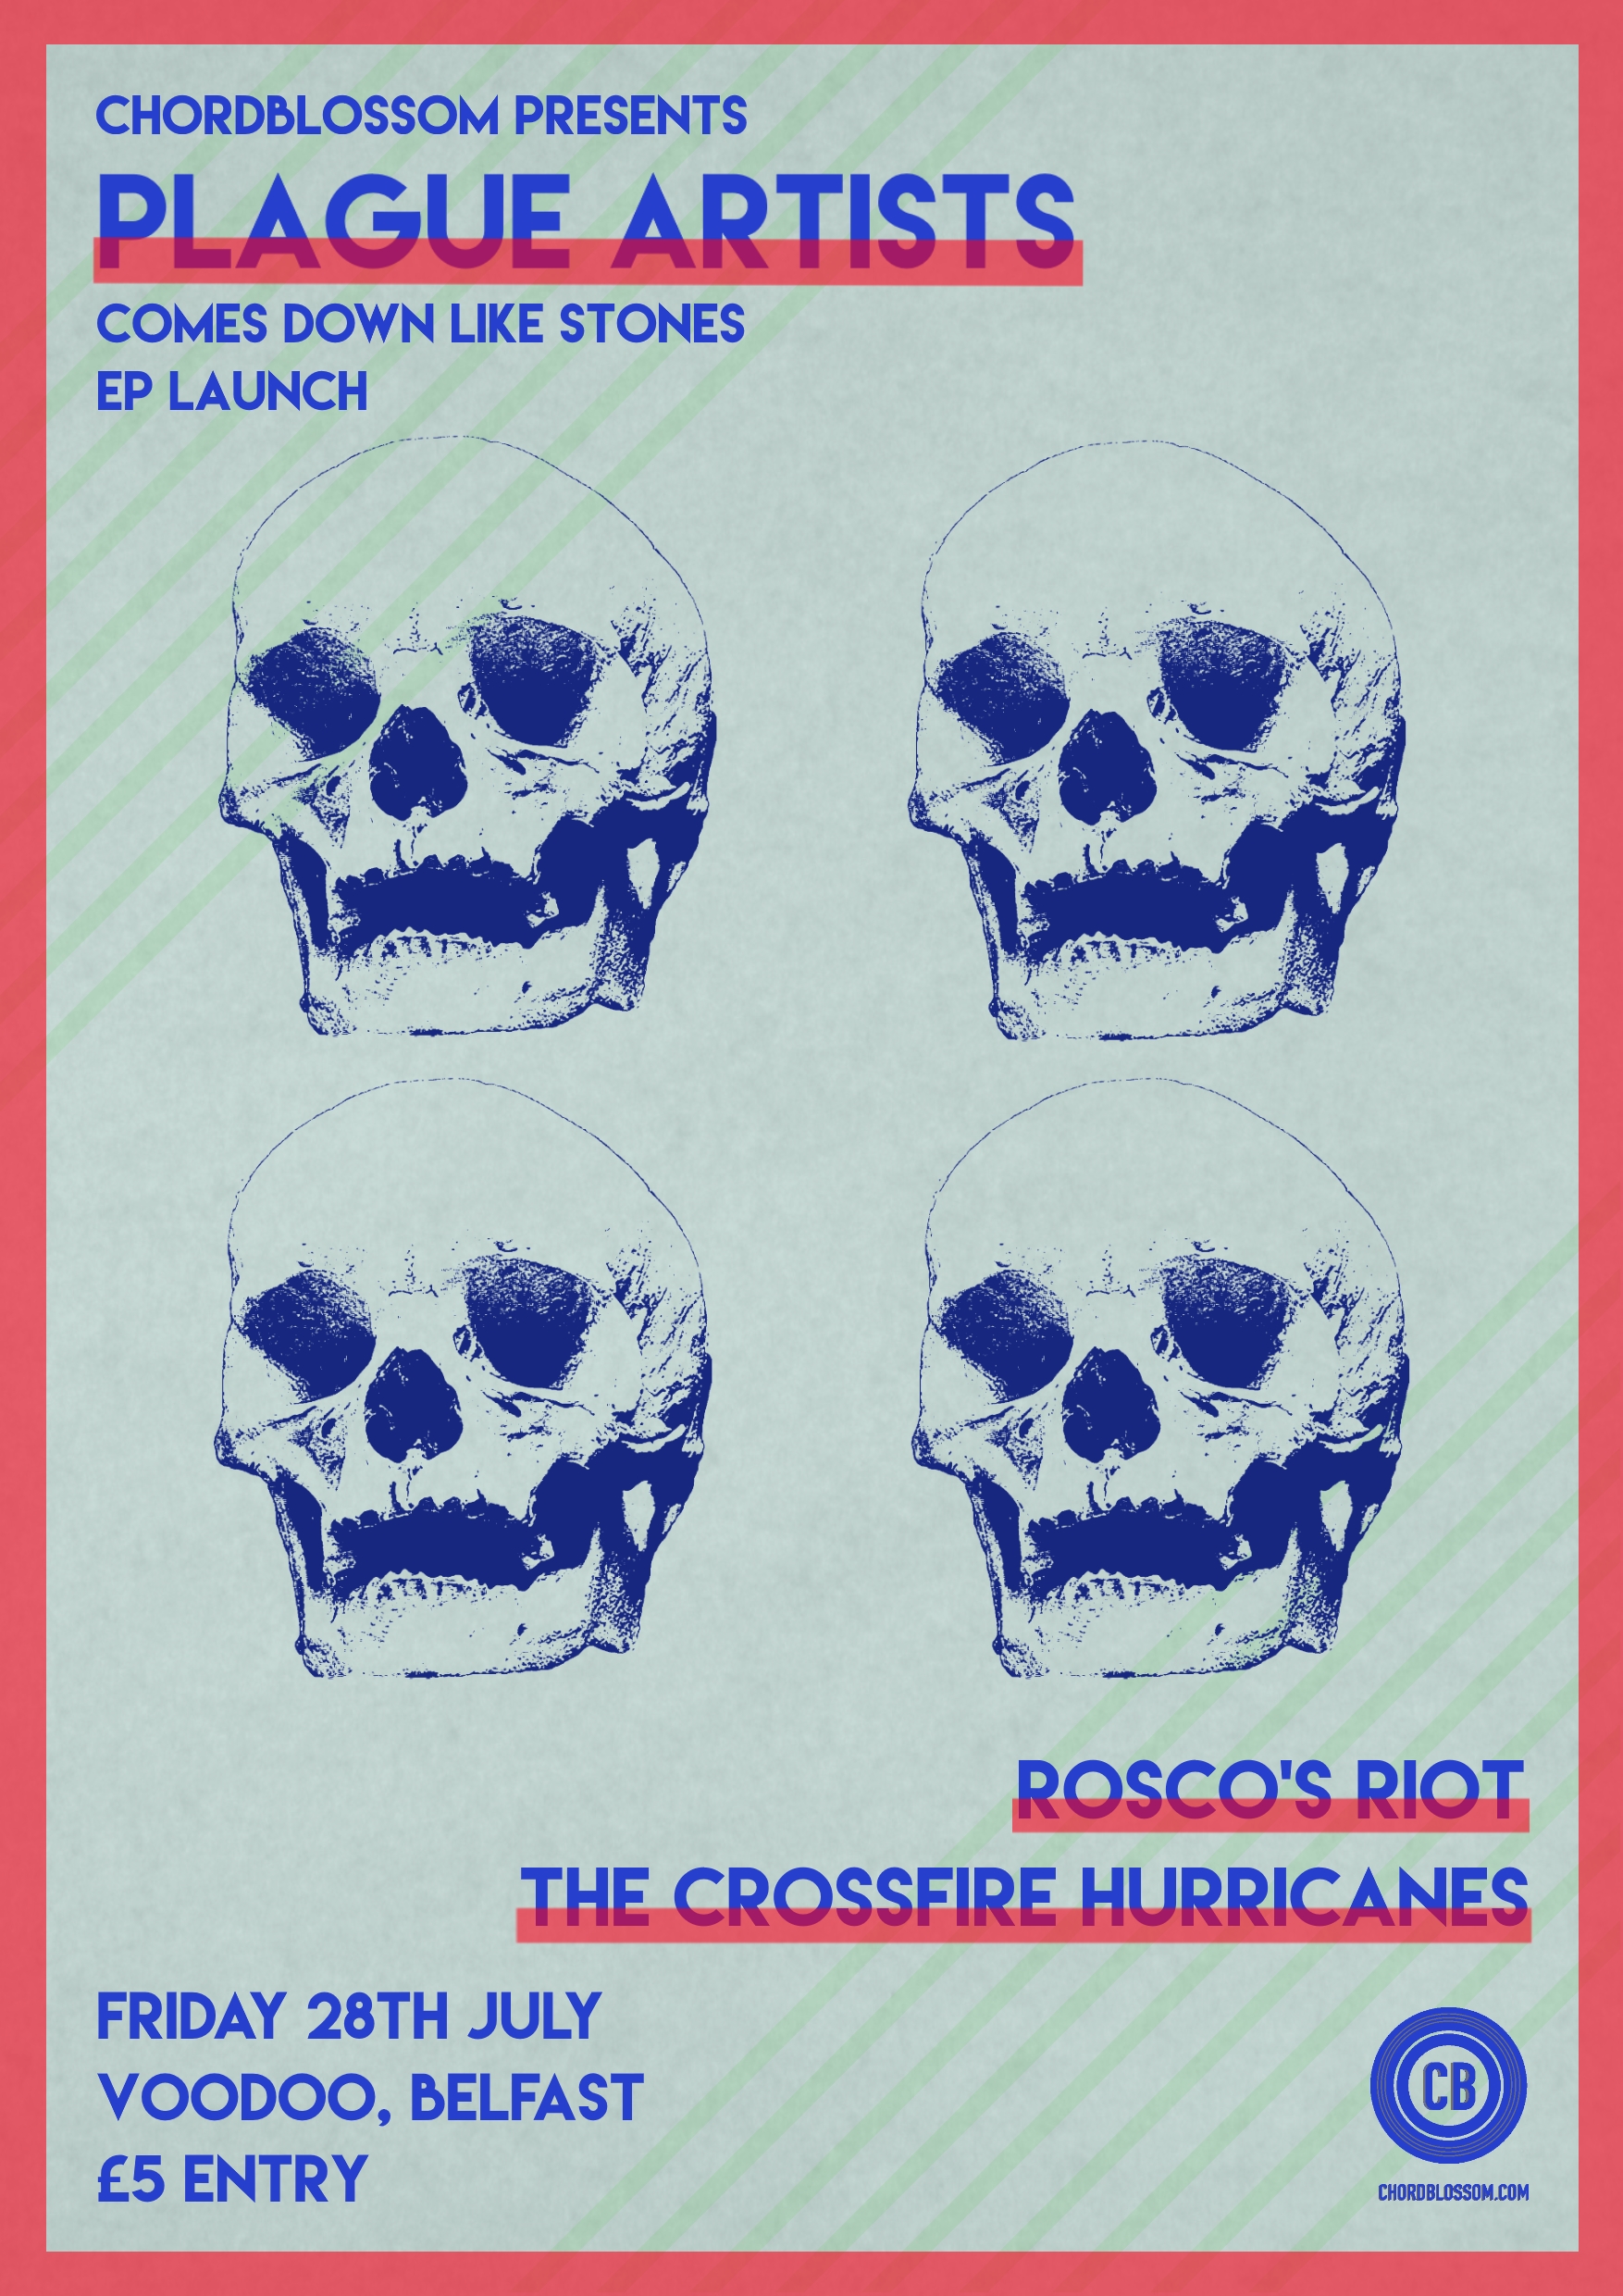 Plague Artists EP Launch with Rosco's Riot and The Crossfire Hurricanes